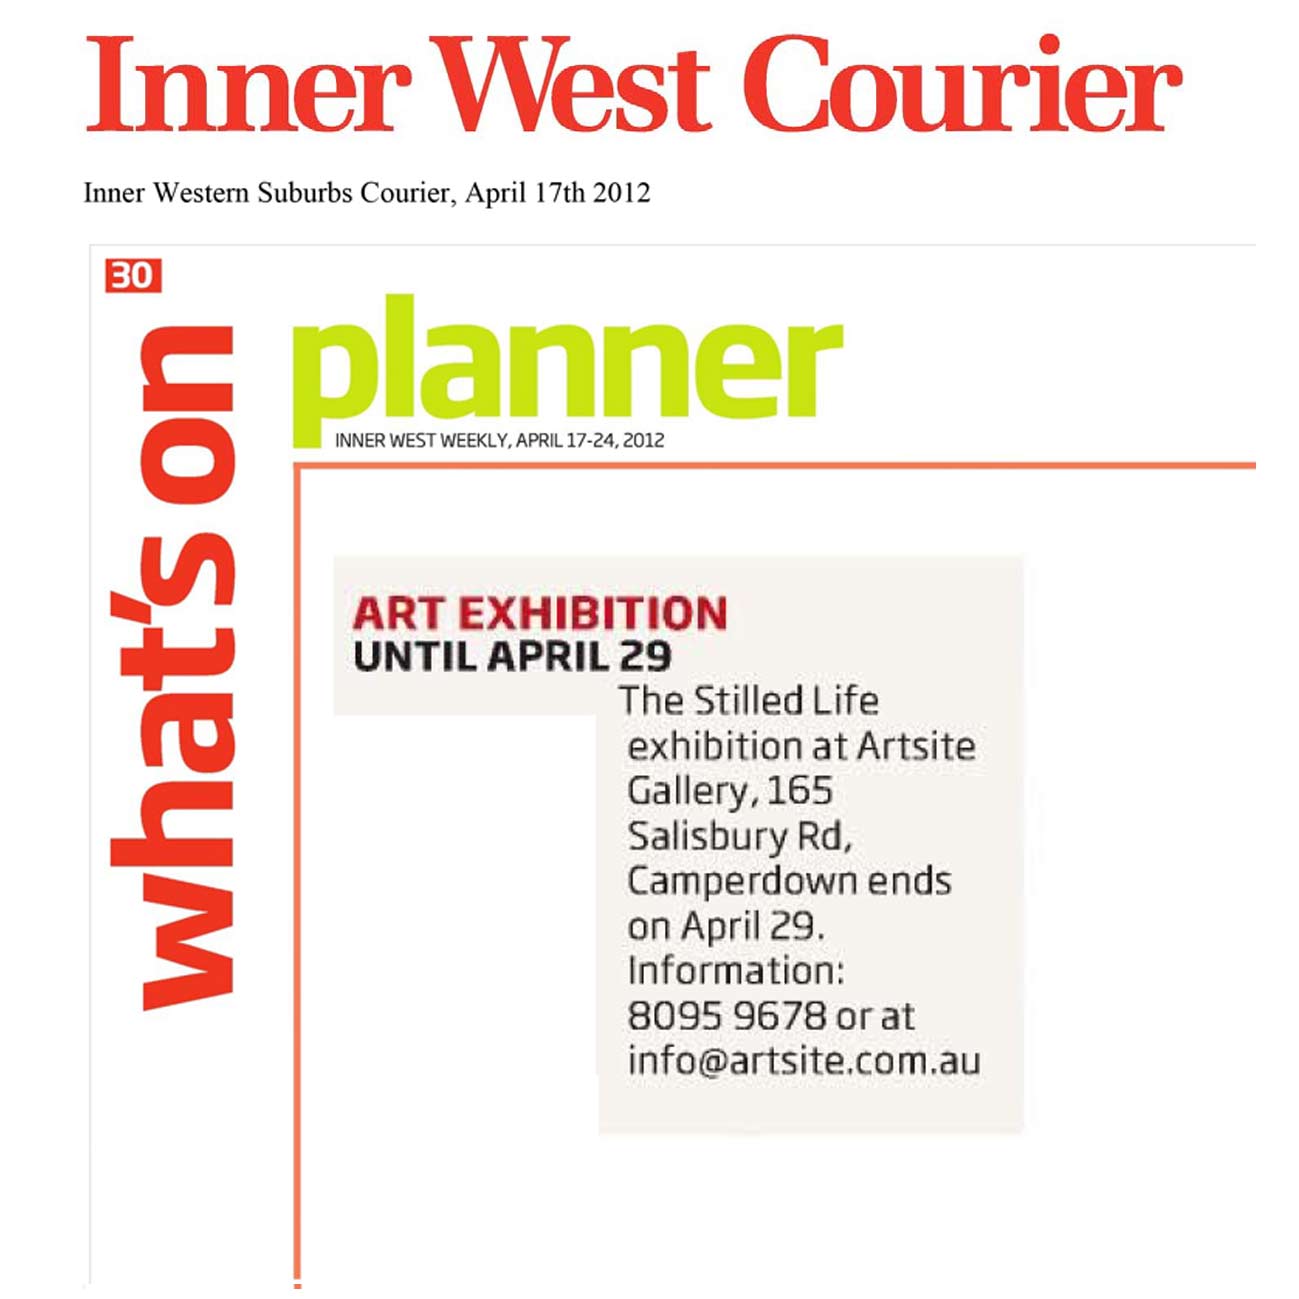 Inner West Courier | Whats On planner | page 30 | April 17 2012. Stilled Life - An exhibition of Still life Paintings and Works on Paper. Artists: Erika Beck, Margaret Bendit, Denis Clarke, Barbara Davidson, Angelika Erbsland, Anne Knowles, Graham Marchant. Artsite  Contemporary until 29 April 2012.